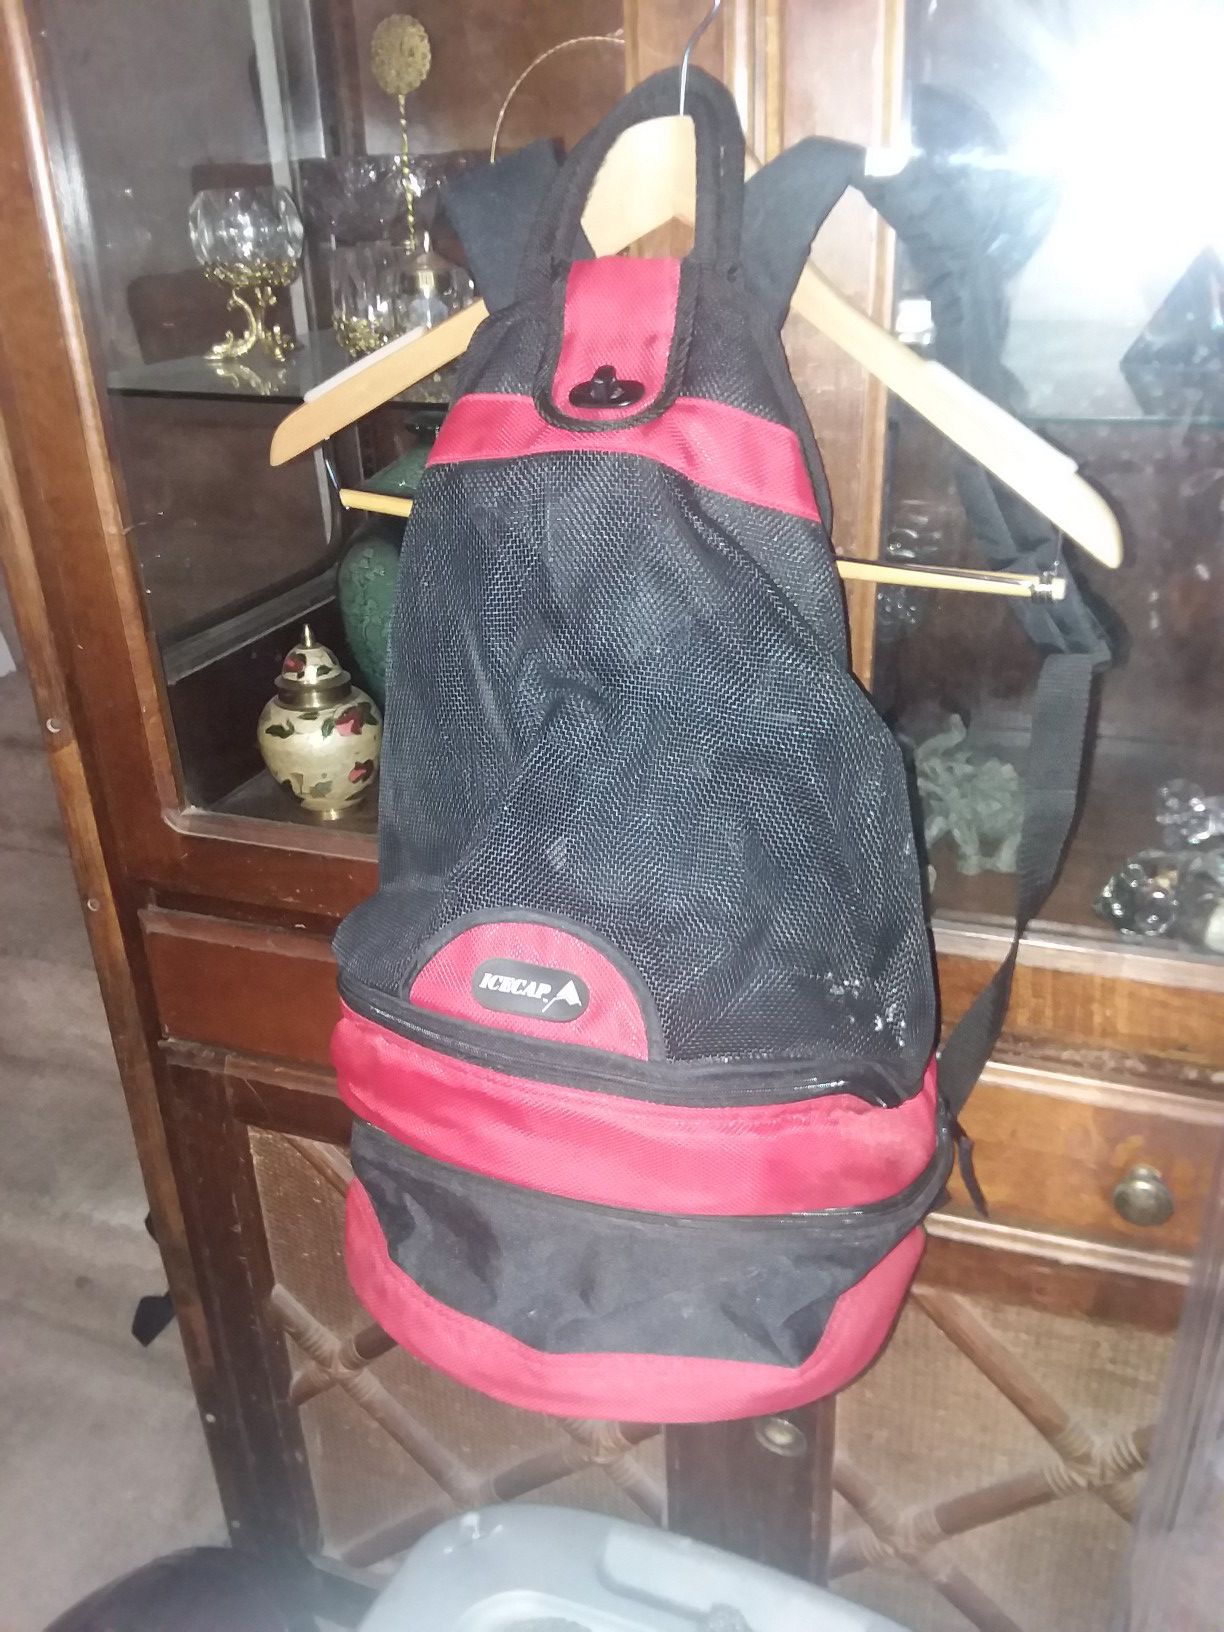 Icecap 3 Compartment Backpack Cooler Red & Black Hiking /Camping Travel Sack